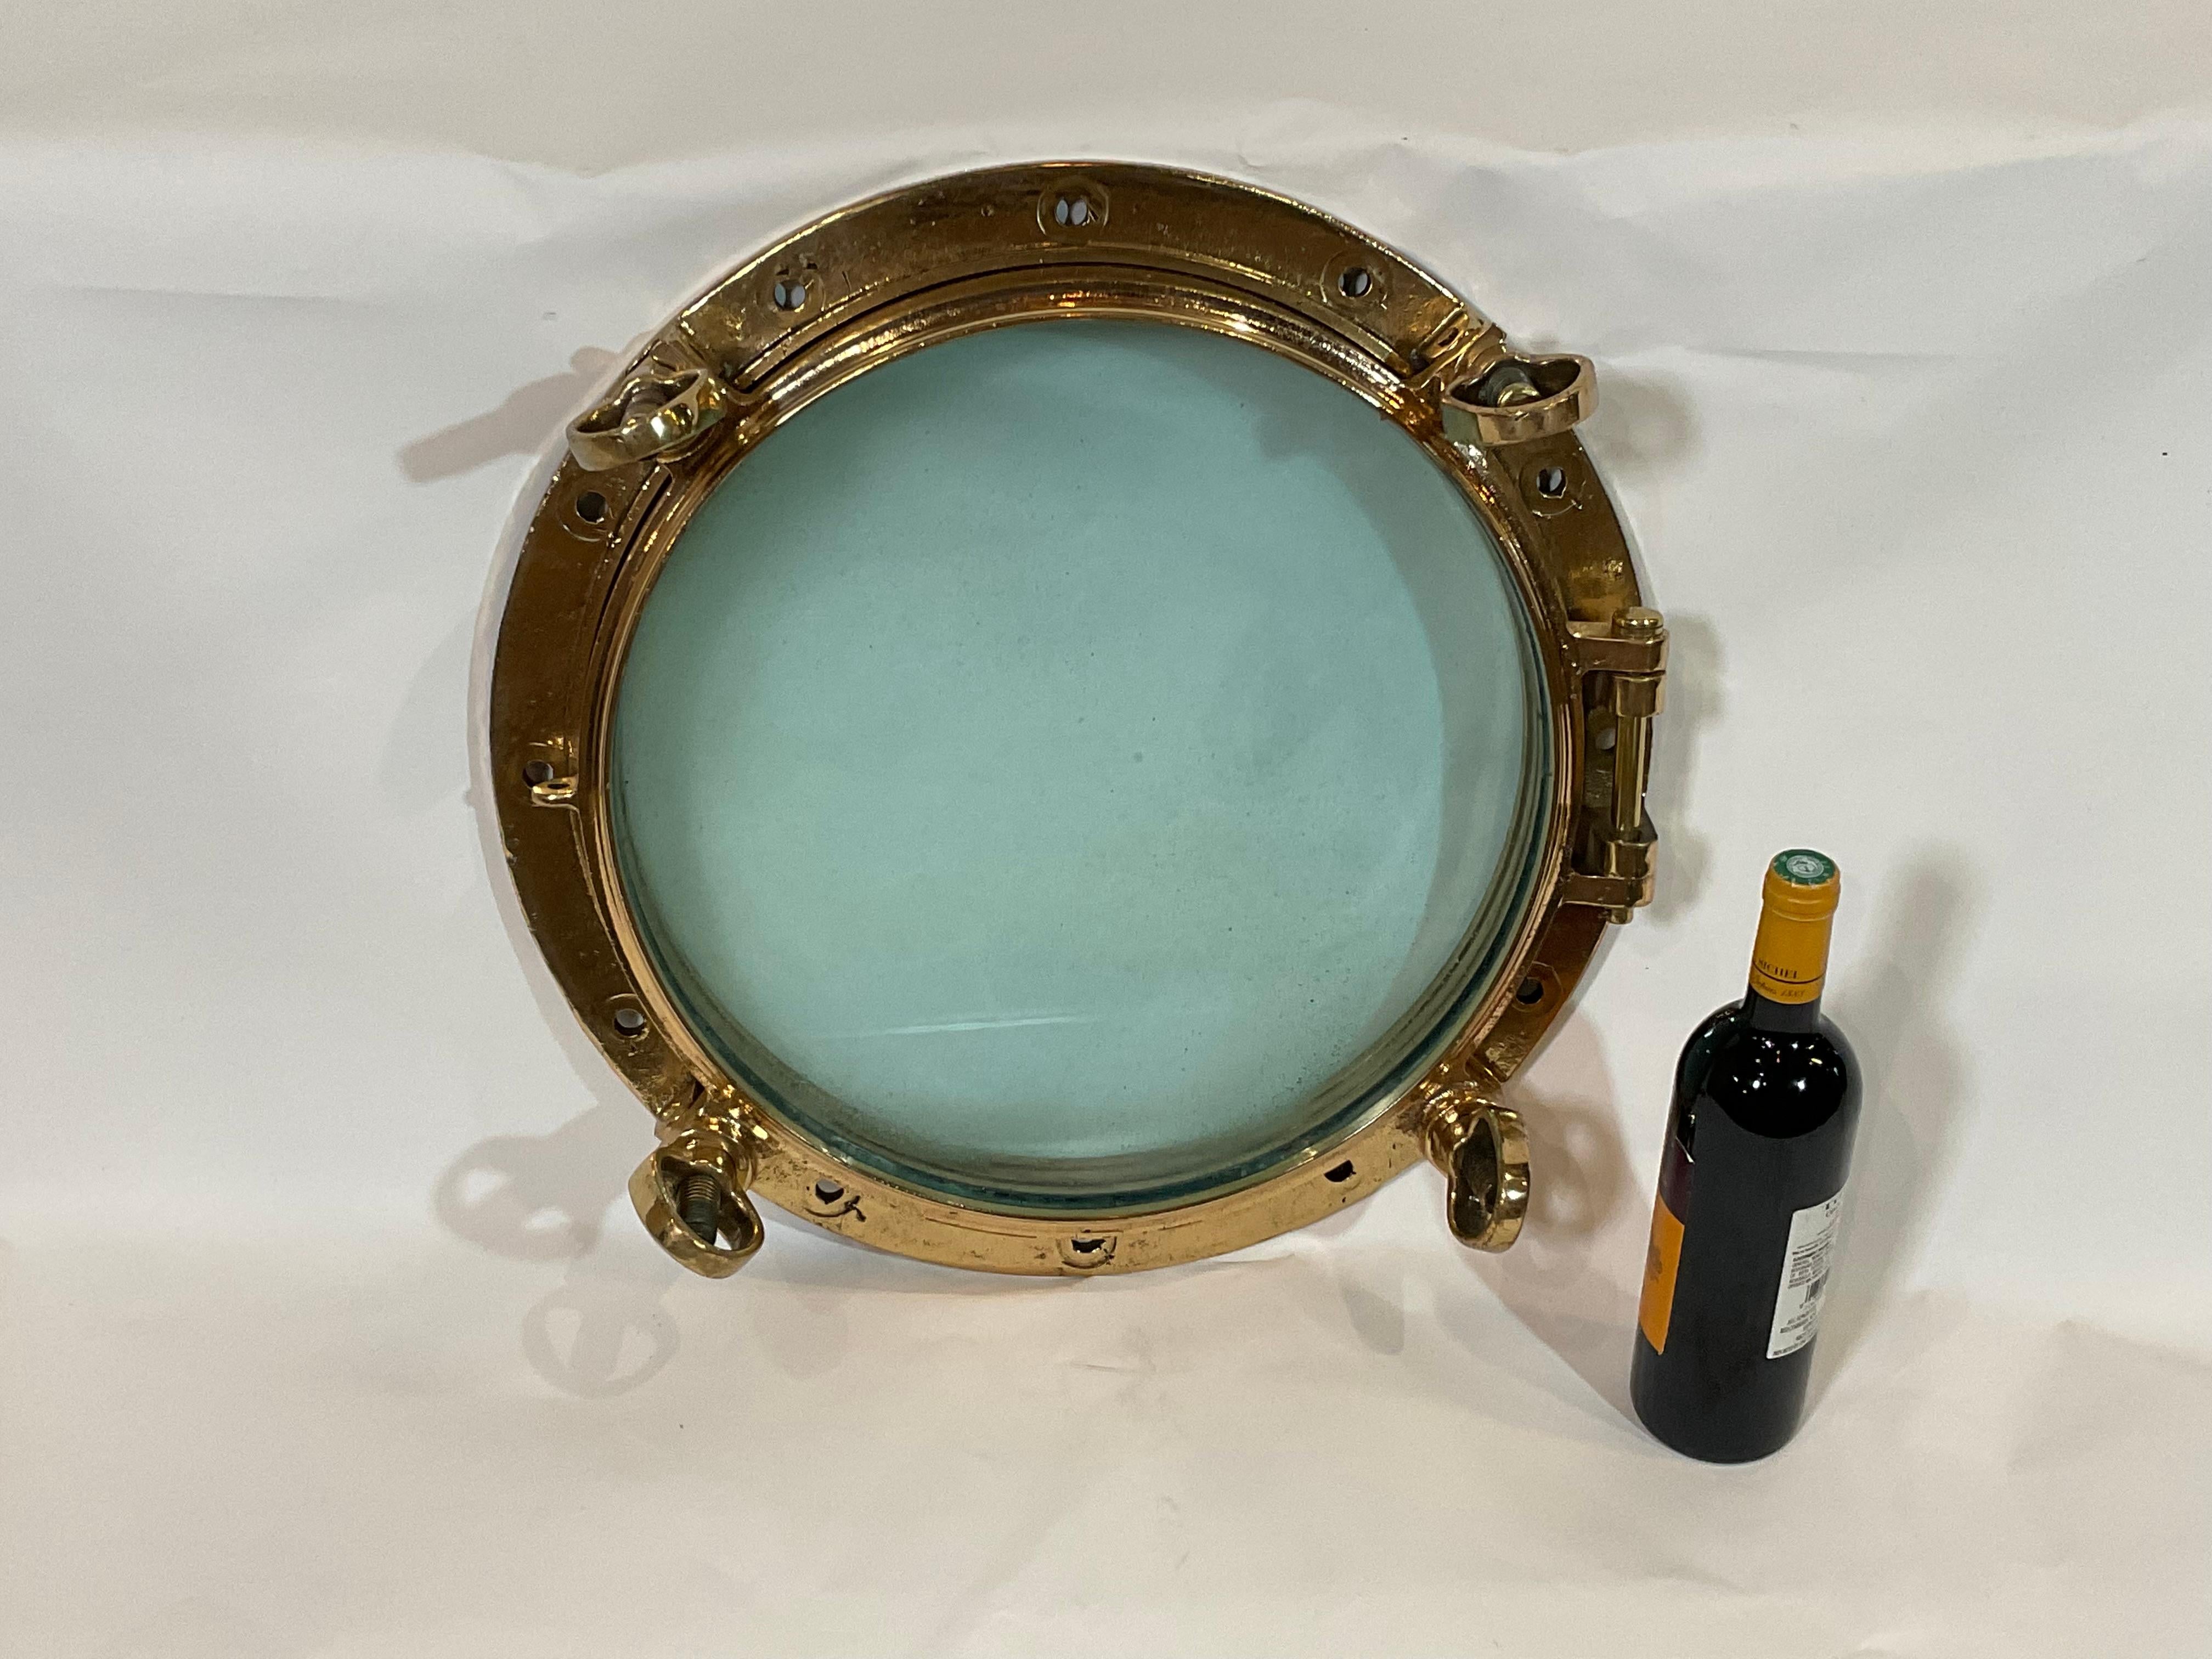 Early 20th century solid brass ships porthole. Hinged door with four dog bolts. Clear glass. Highly polished and lacquered.

Weight: 47 LBS
Overall Dimensions: 6” H x 20” Diam
Glass 16